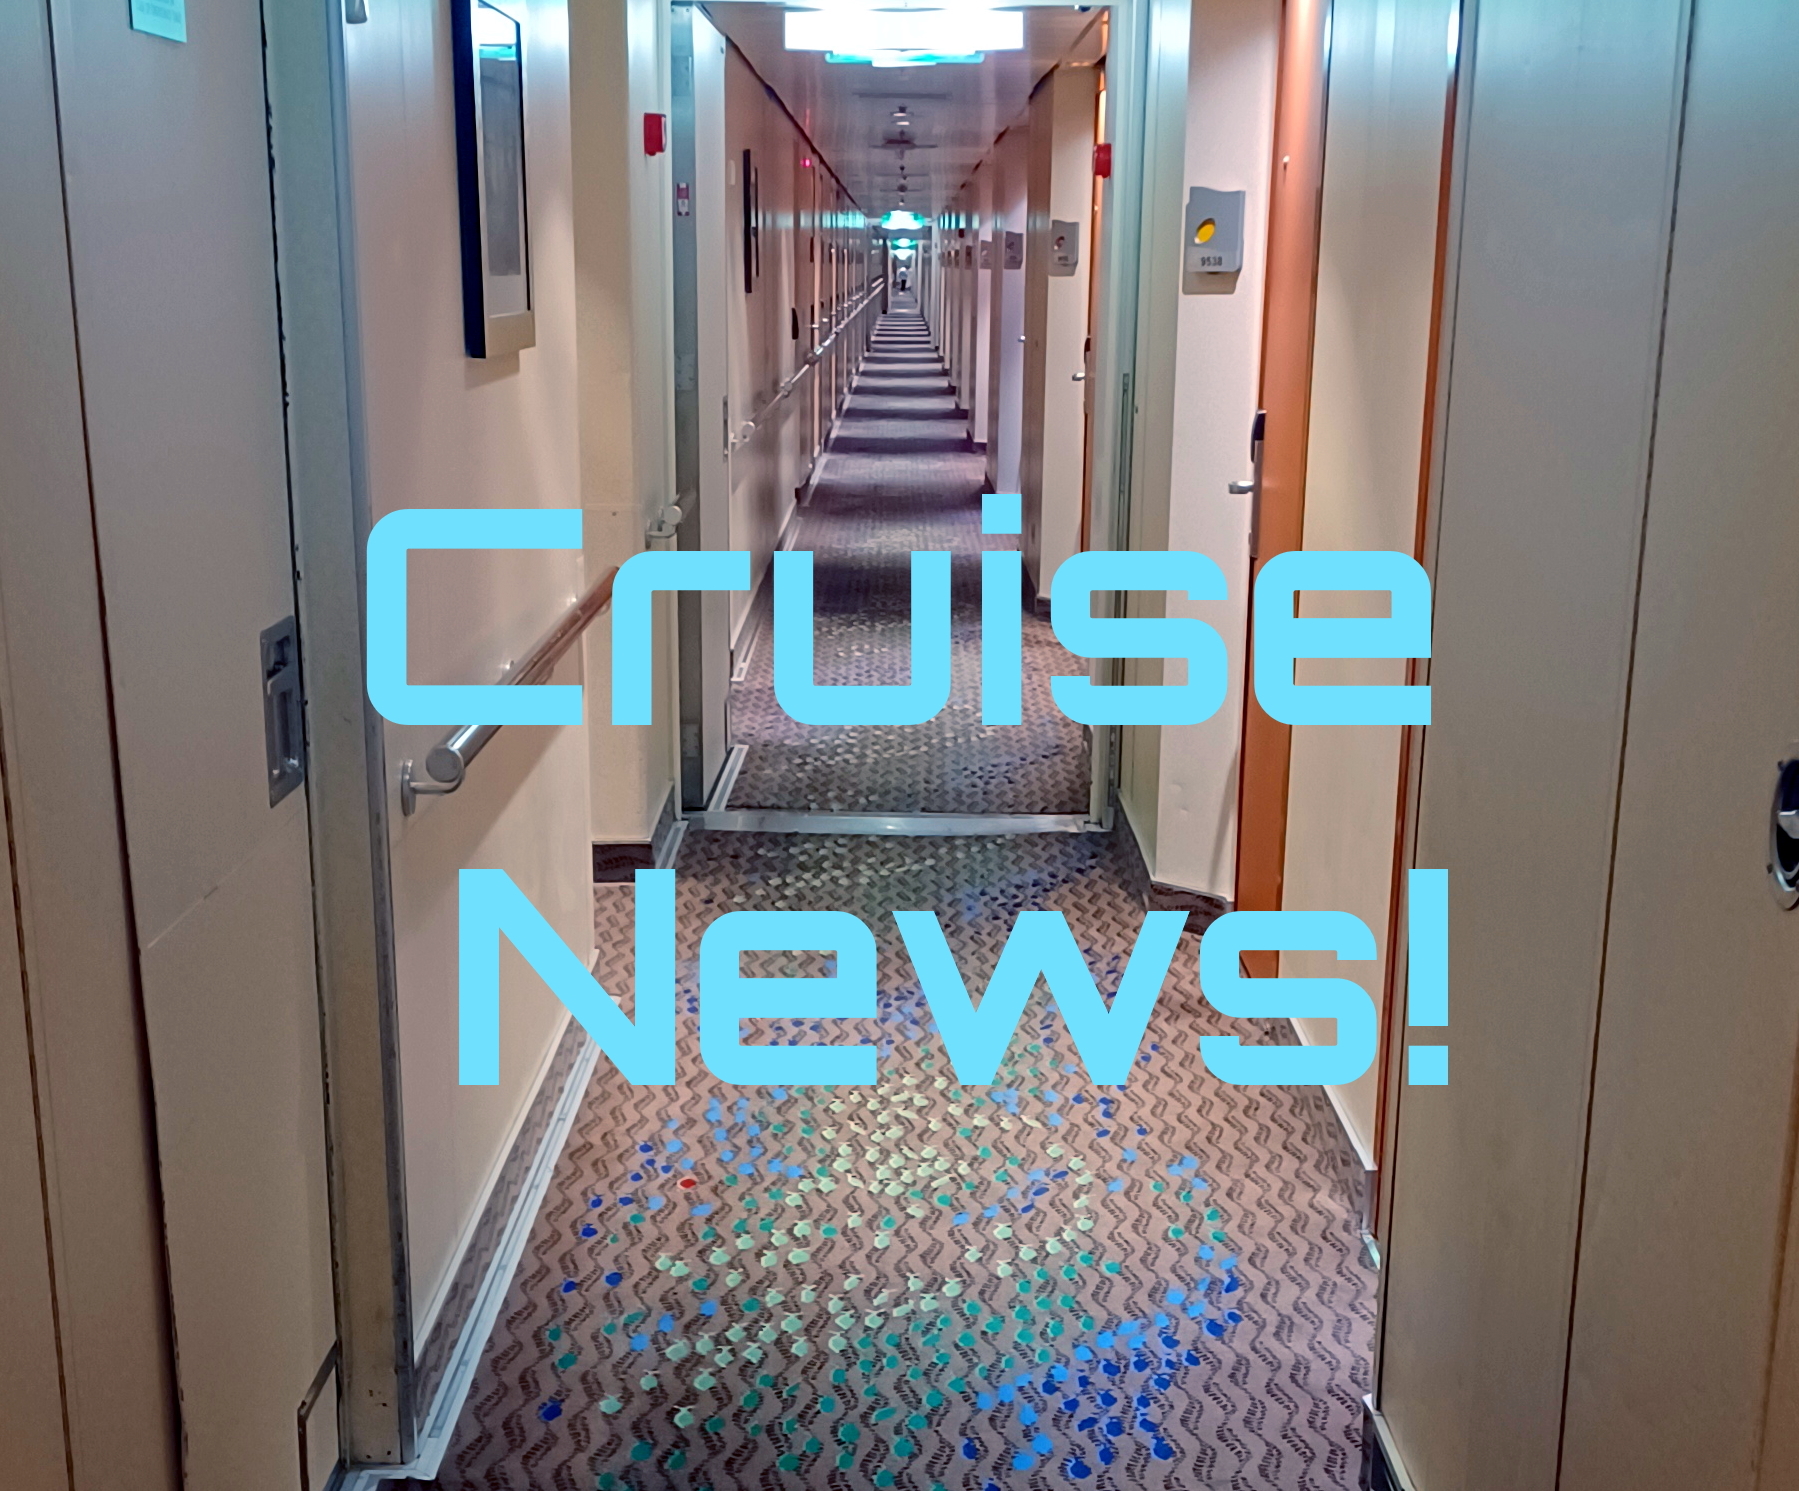 news for tampa swingers cruise